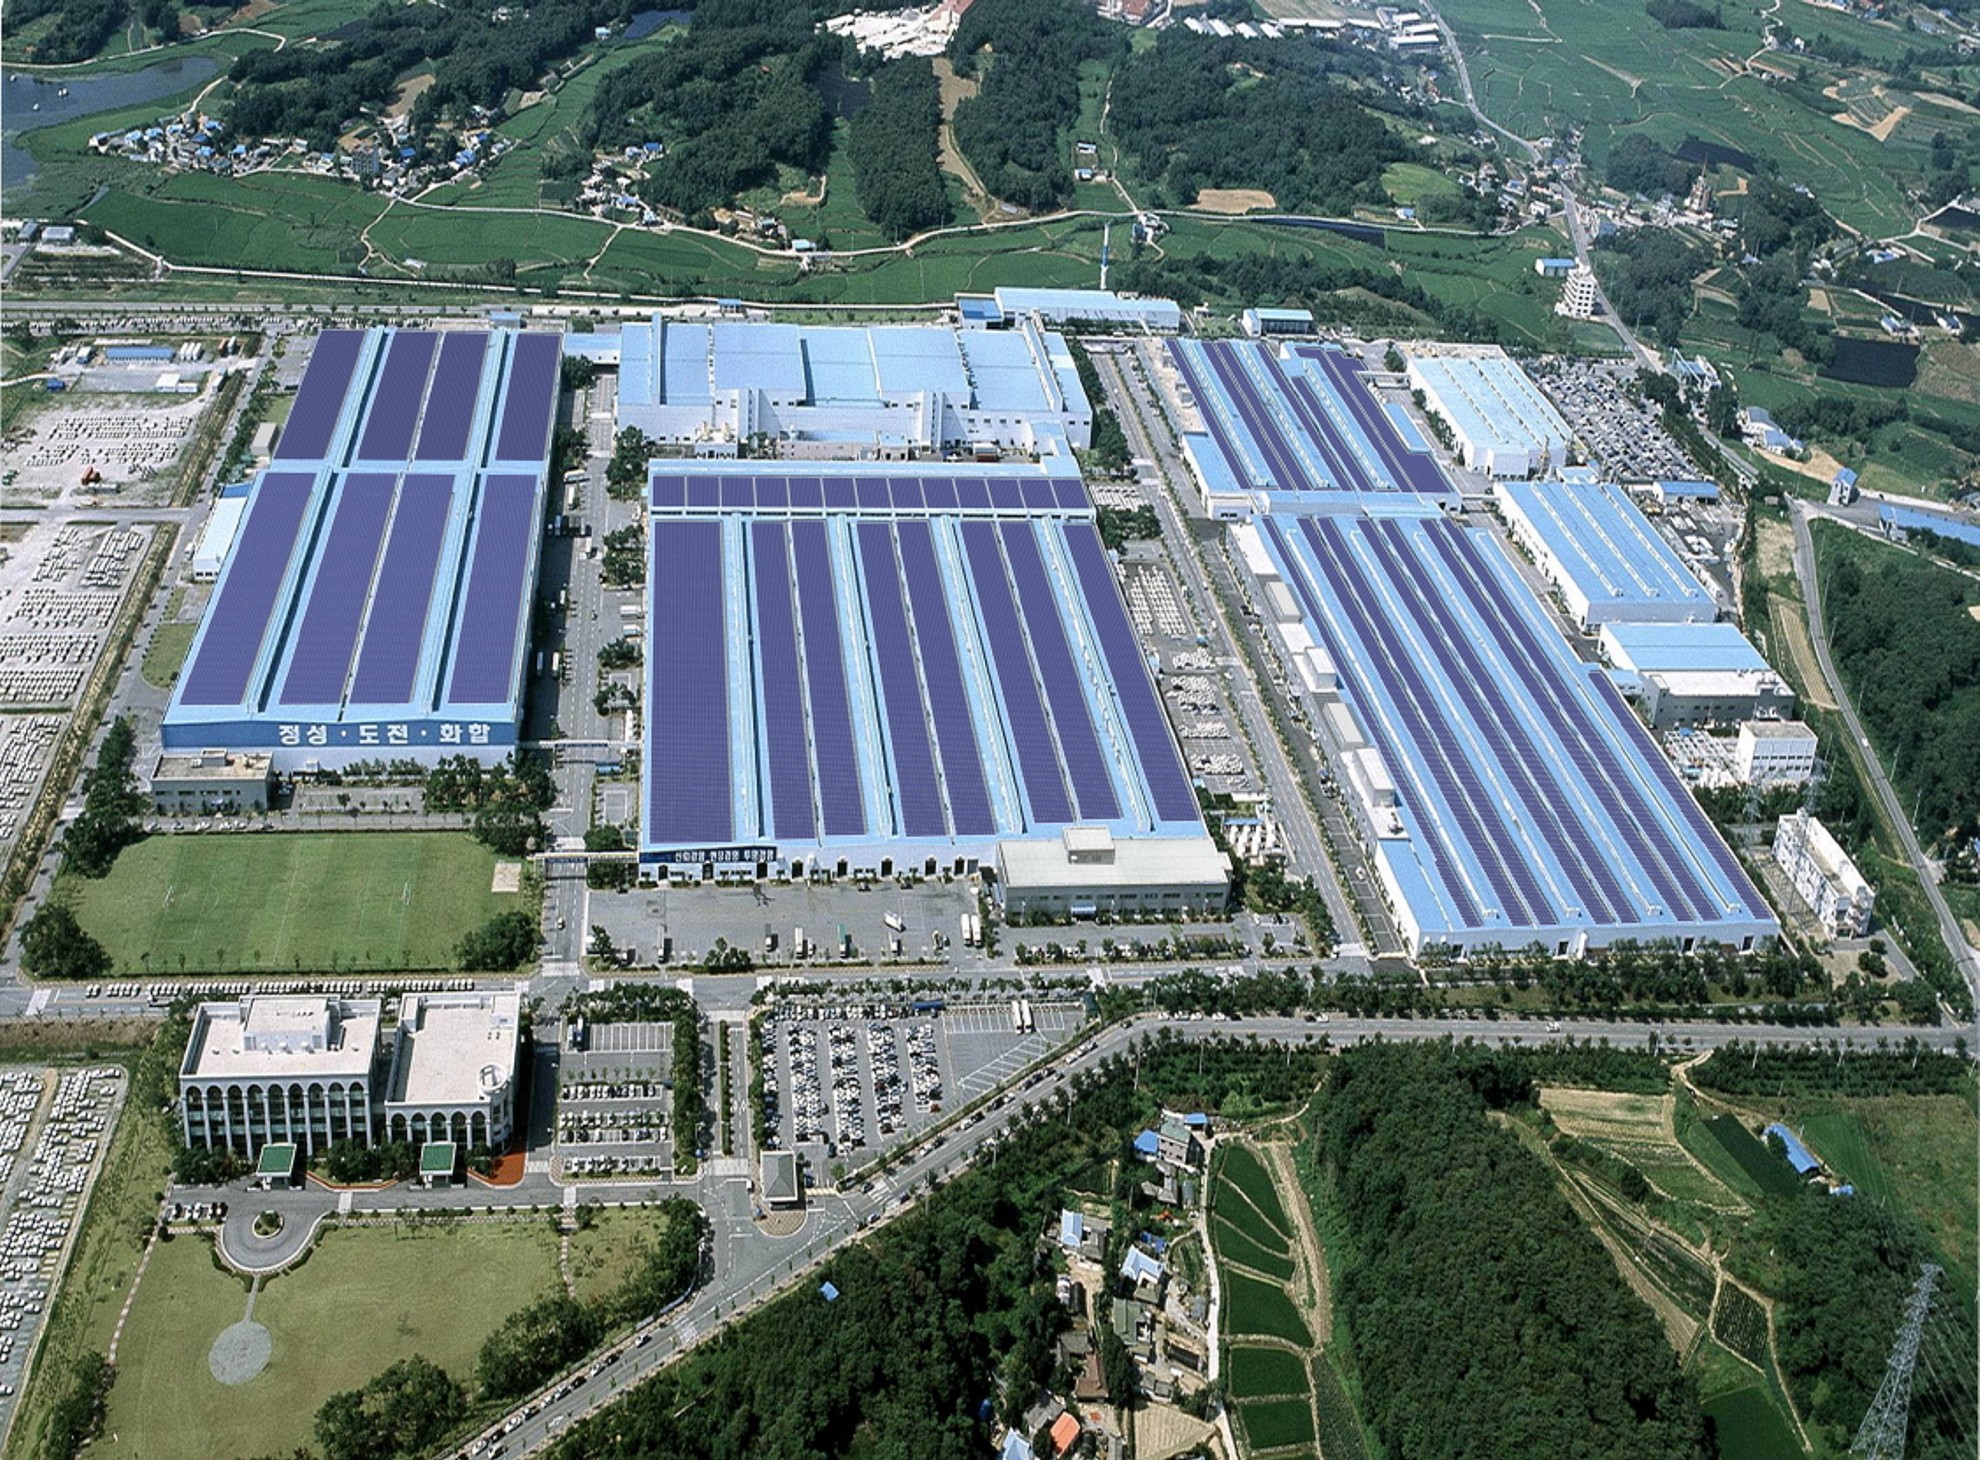 Hyundai Motor to install South Korea’s largest rooftop photovoltaic power plant at Asan factory